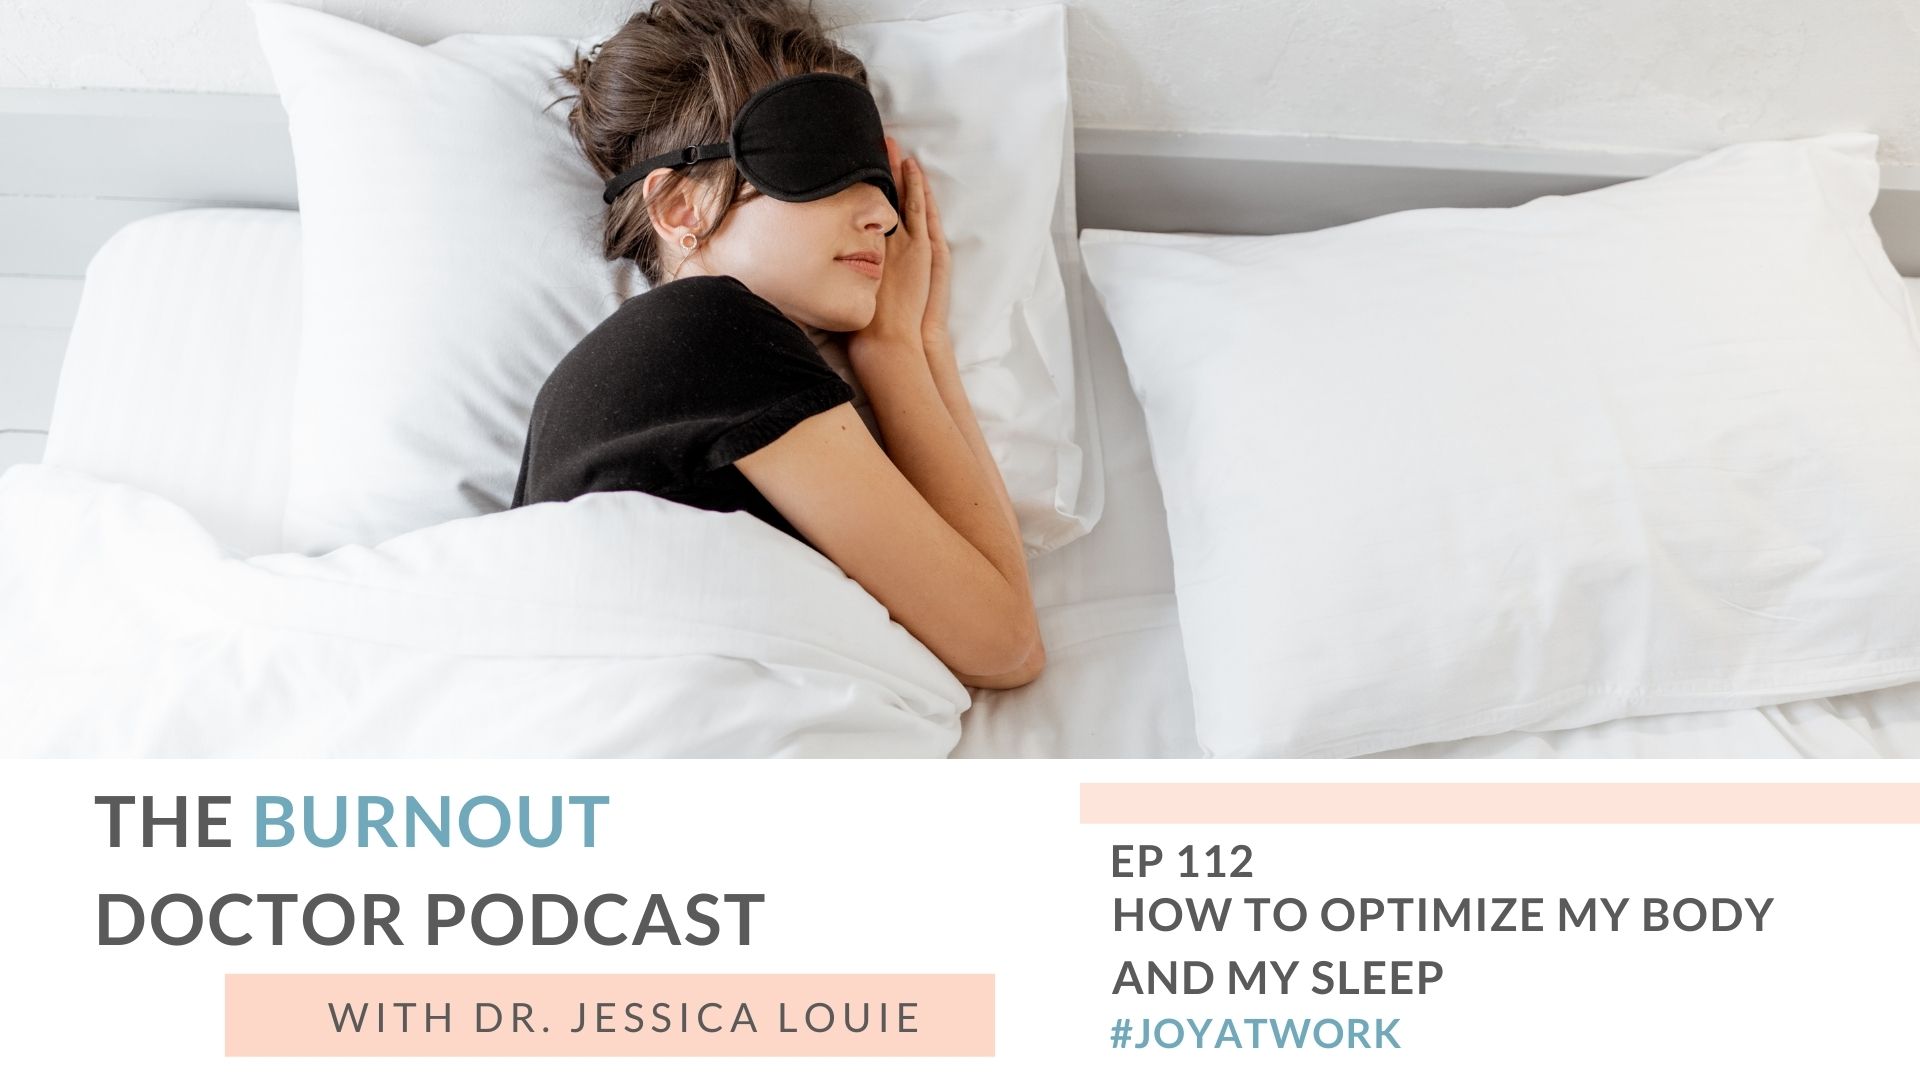 How to optimize body and sleep for burnout prevention and sleep for burnout help. Pharmacist burnout coaching. The Burnout Doctor Podcast by Dr. Jessica Louie. How sleep helps burnout. Why we Sleep by Matthew Walker PhD.